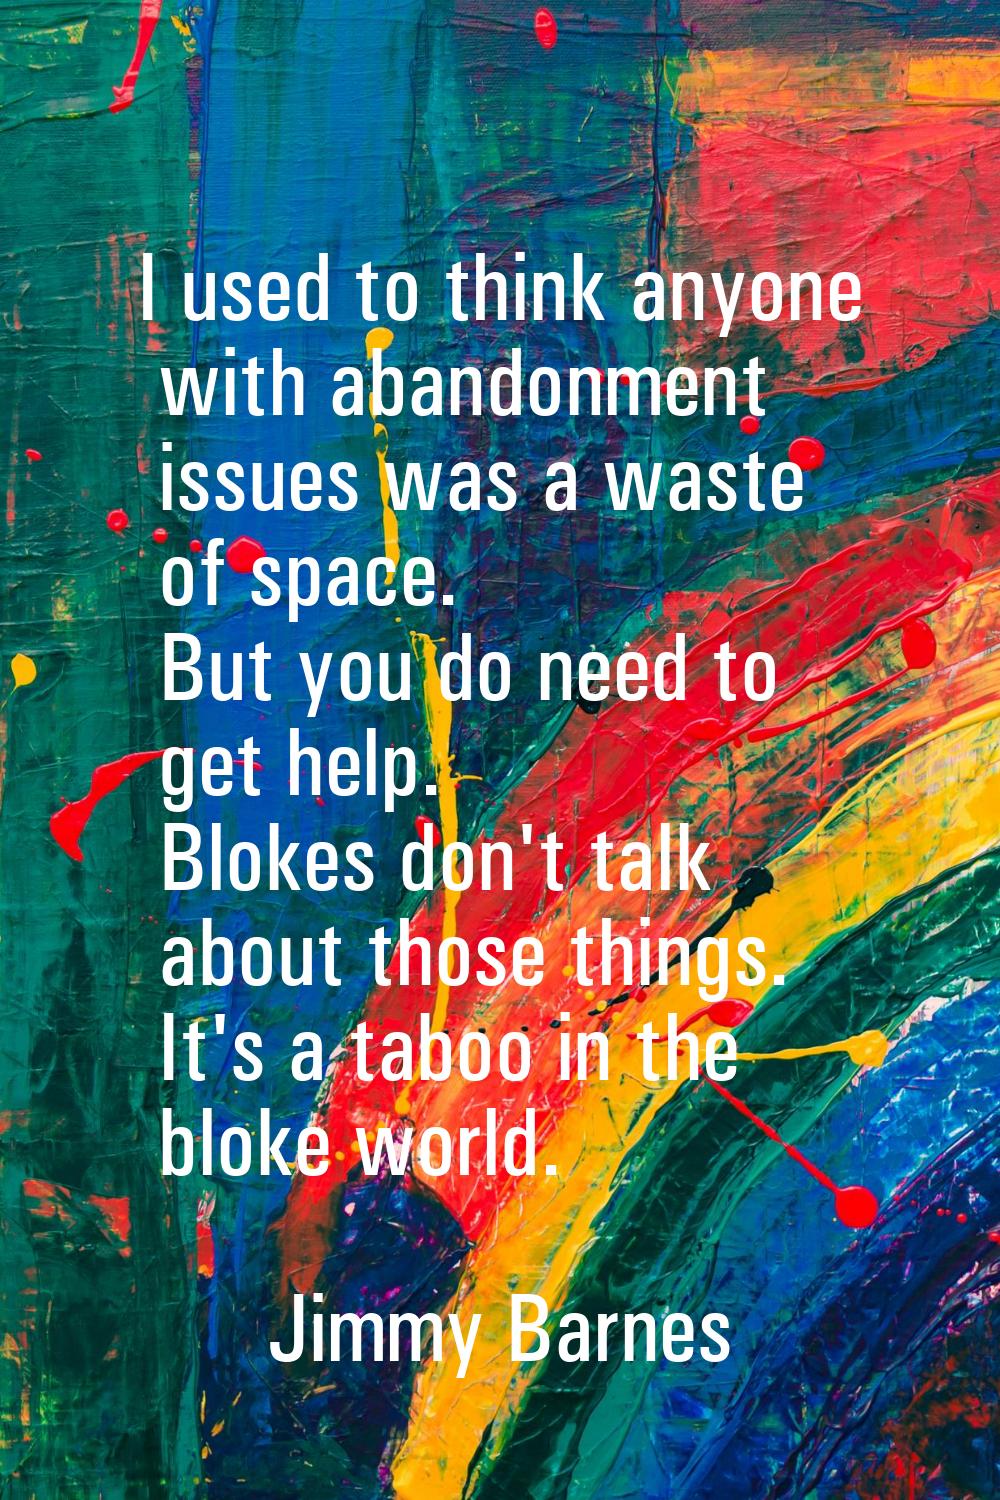 I used to think anyone with abandonment issues was a waste of space. But you do need to get help. B